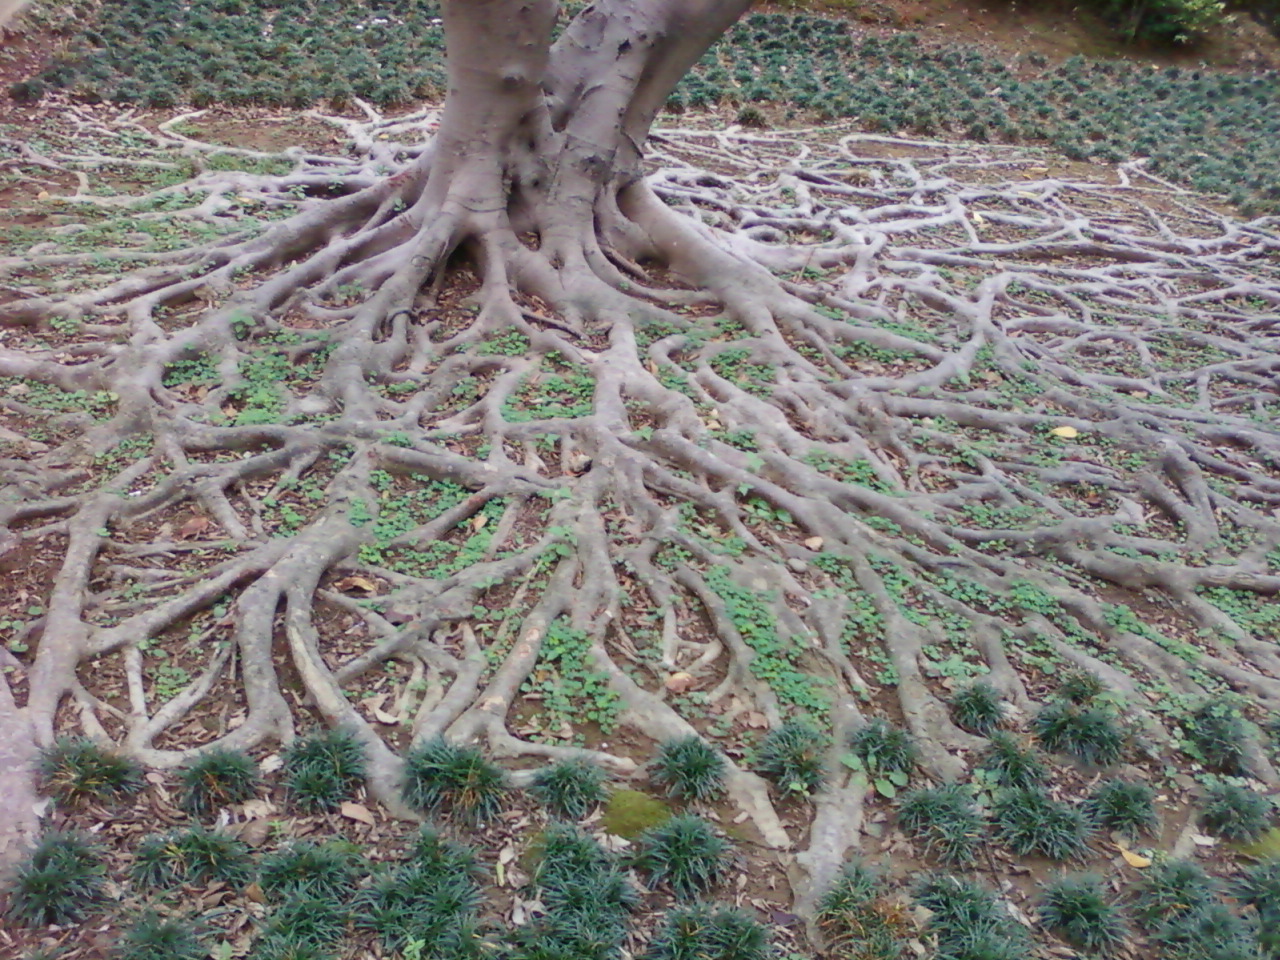 every diesease has causes, just like every tree has roots